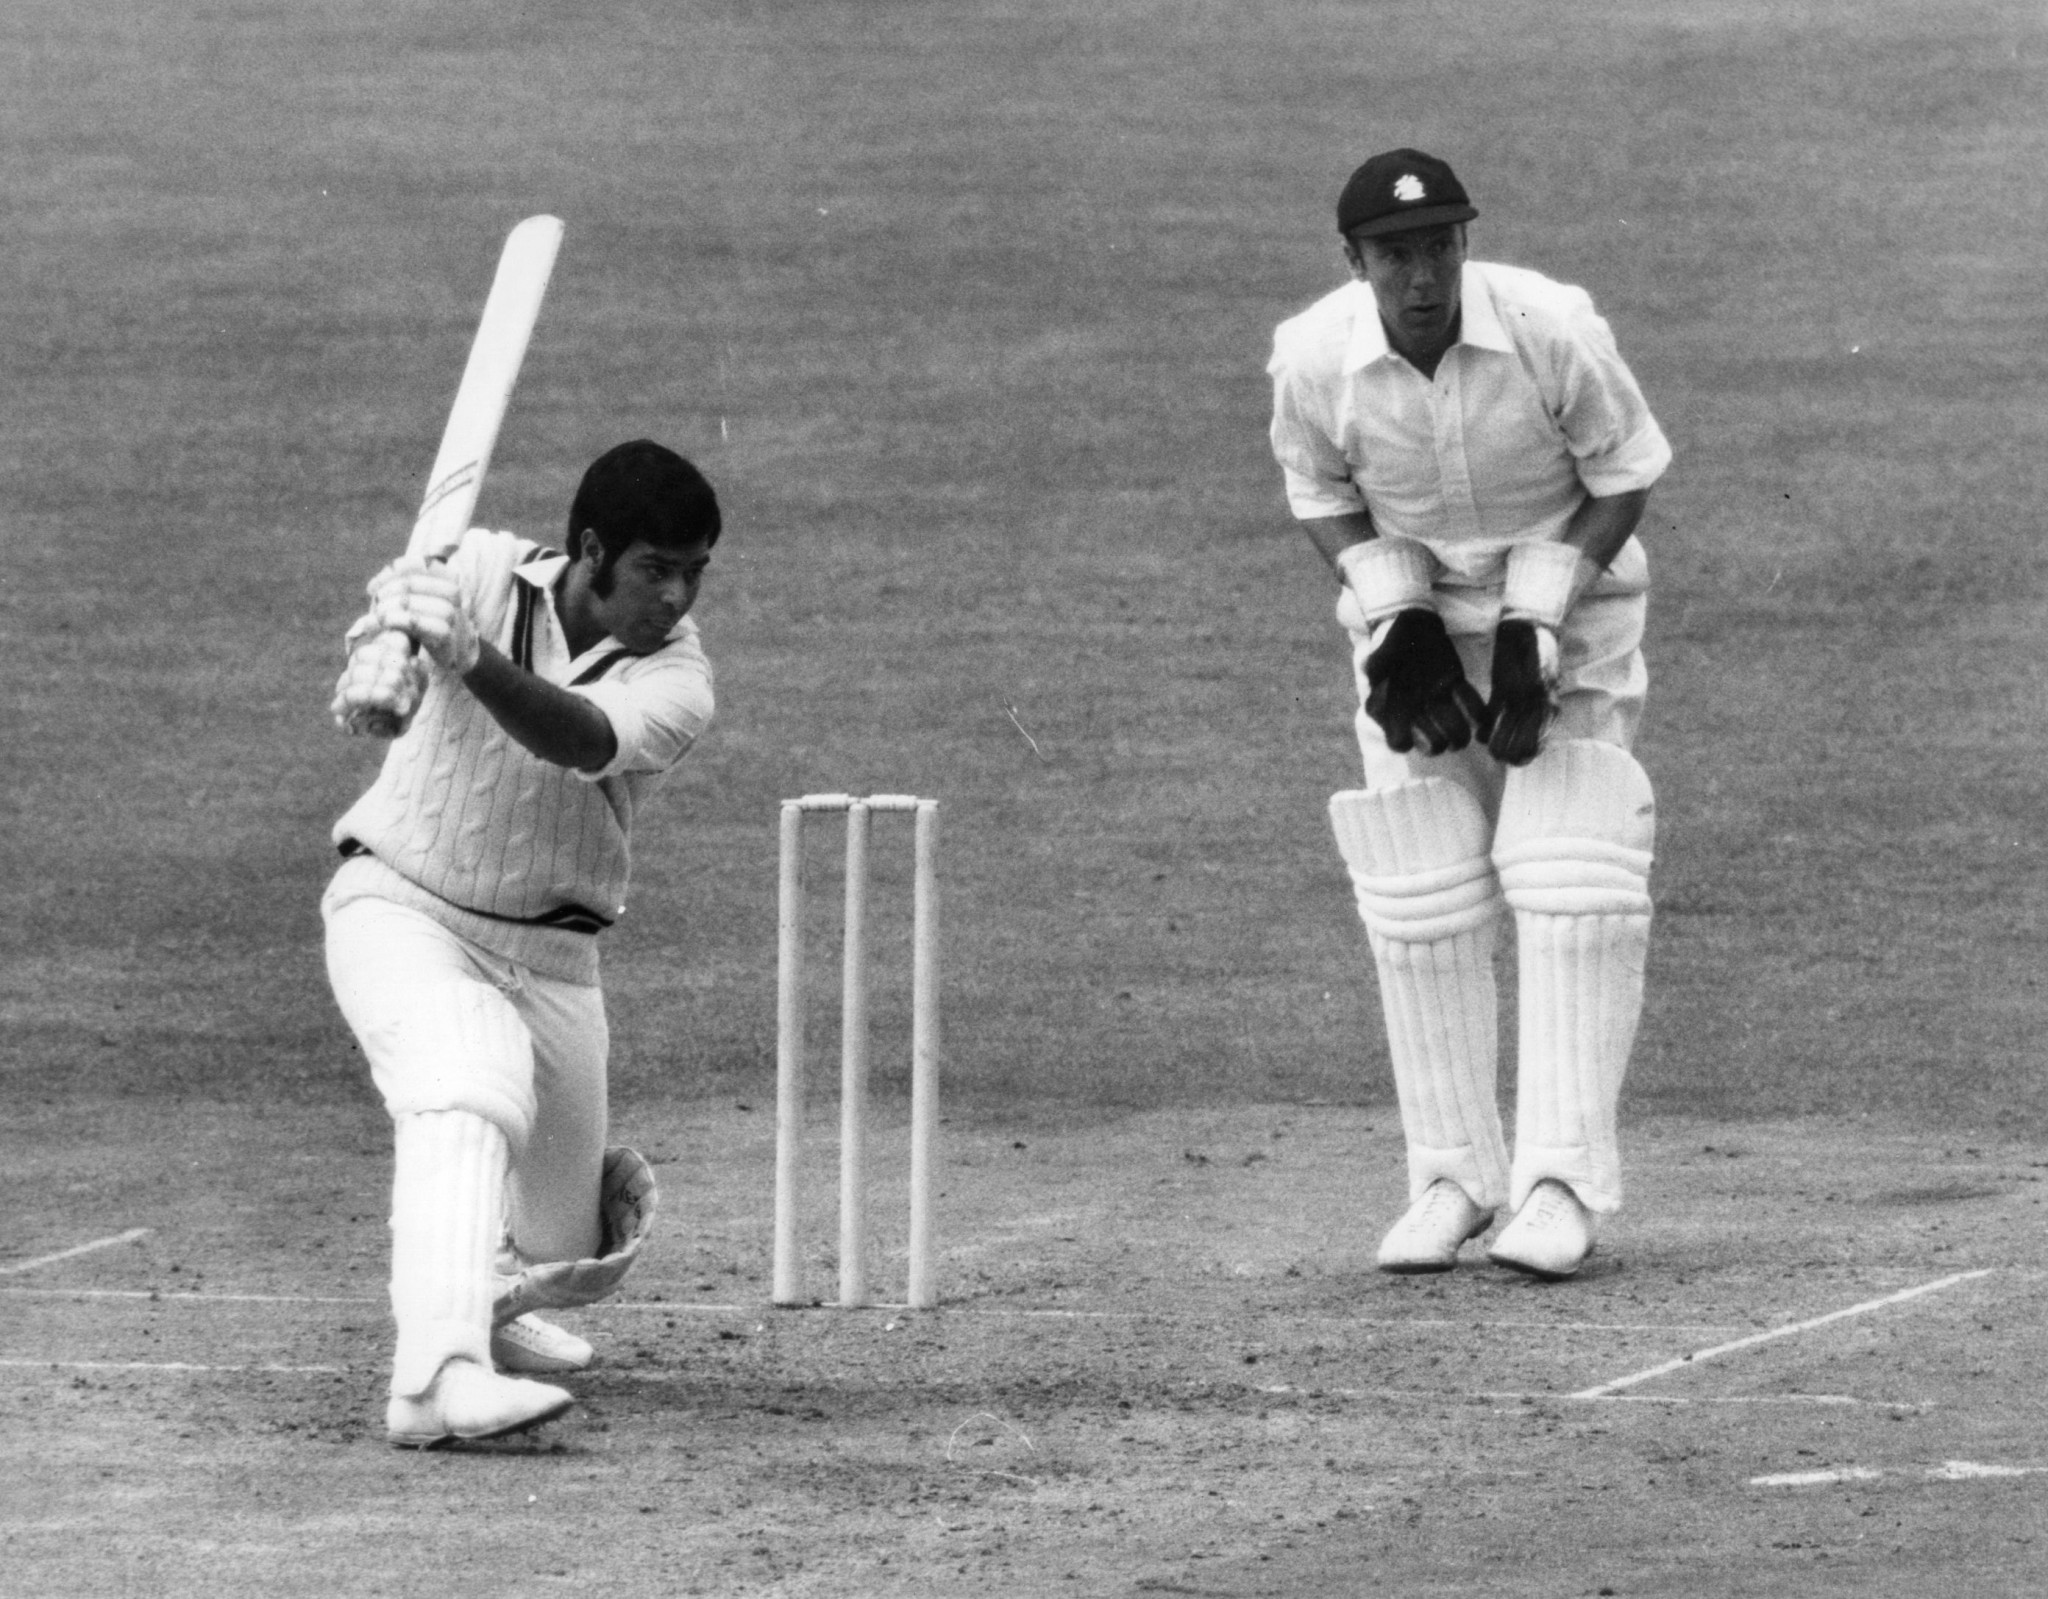 Pakistani batsman Younis Ahmed was a member of the second DH Robins XI to tour South Africa in 1973 ©Getty Images